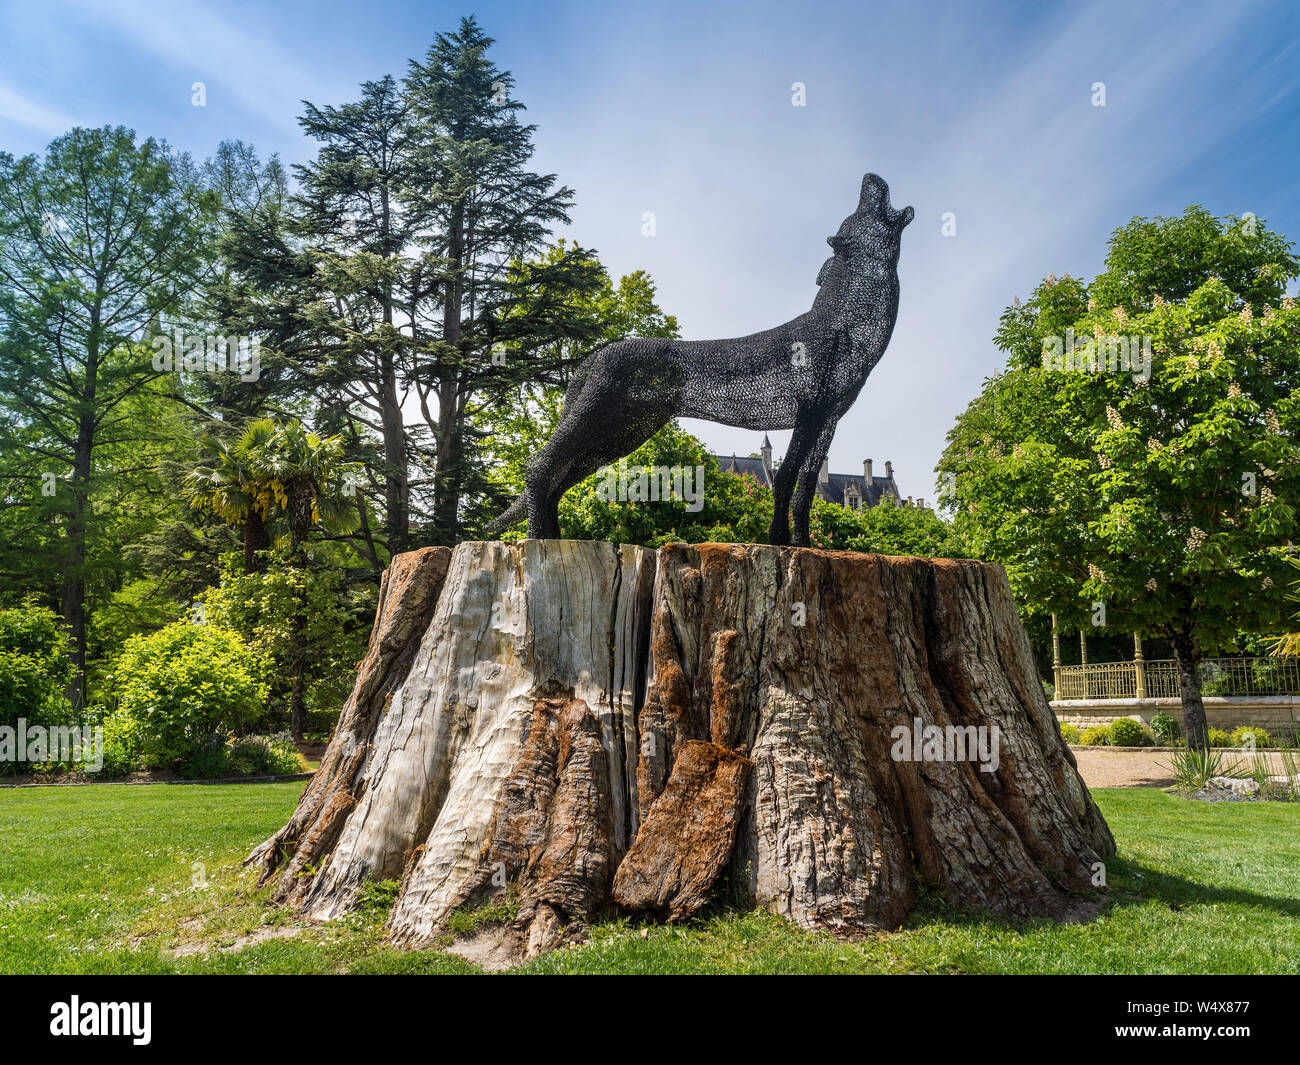 Metal wire sculpture of wolf on tree stump - Loches, France. Stock Photo